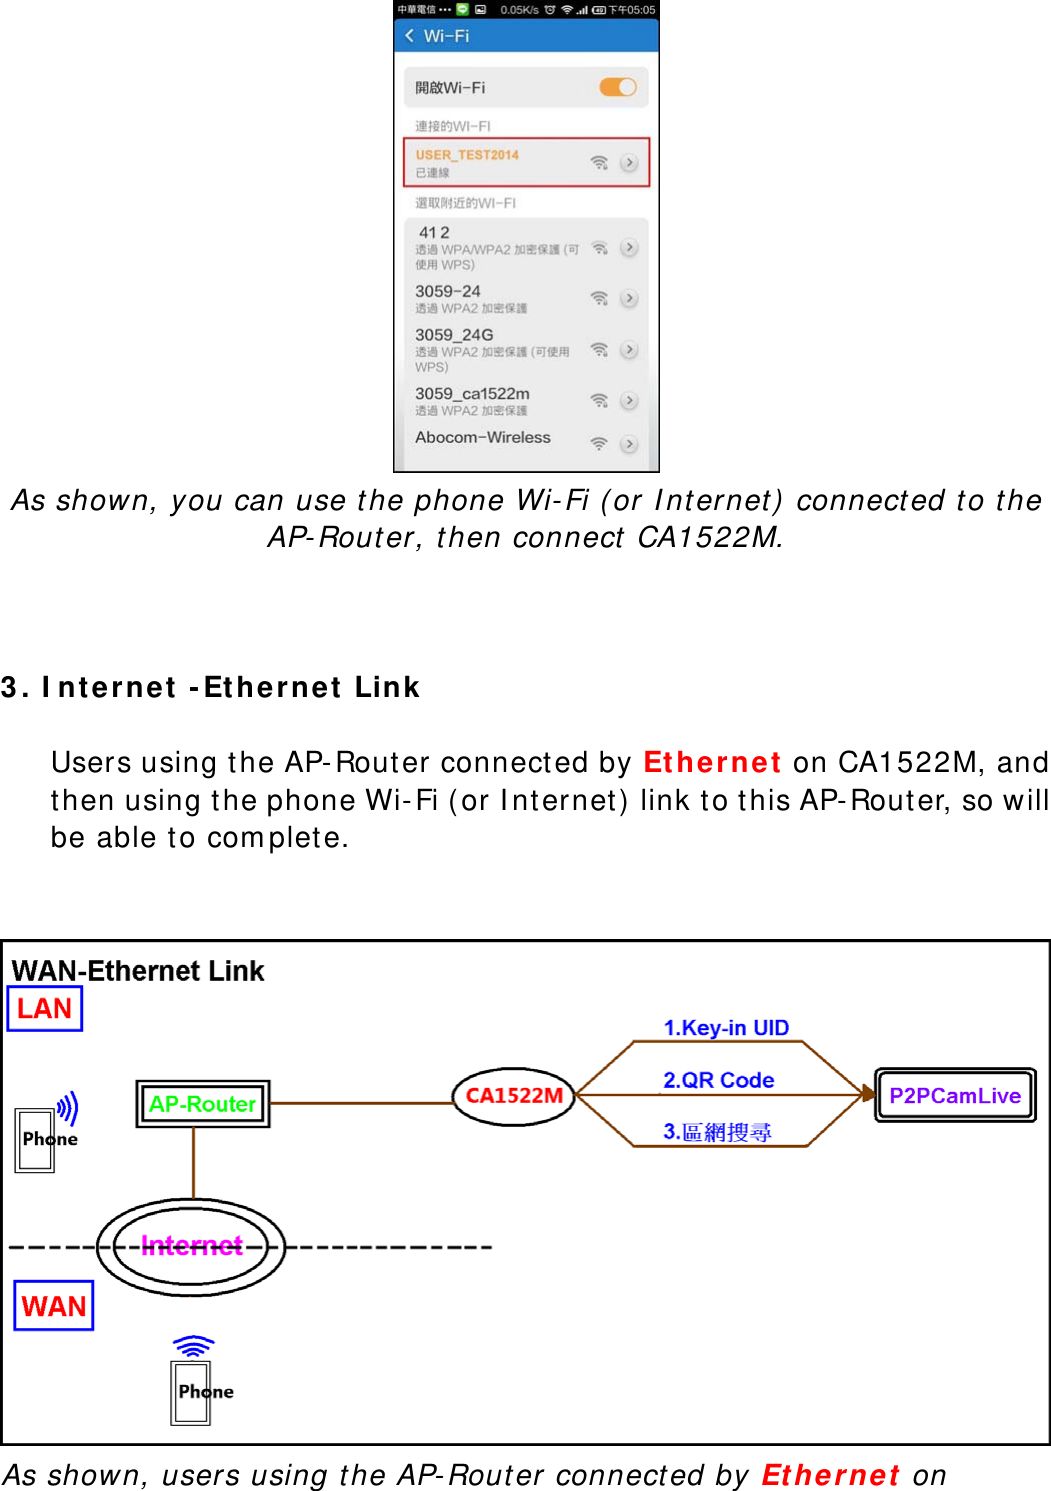  As shown, you can use the phone Wi-Fi (or Internet) connected to the AP-Router, then connect CA1522M.    3. Internet -Ethernet Link  Users using the AP-Router connected by Ethernet on CA1522M, and then using the phone Wi-Fi (or Internet) link to this AP-Router, so will be able to complete.    As shown, users using the AP-Router connected by Ethernet on 